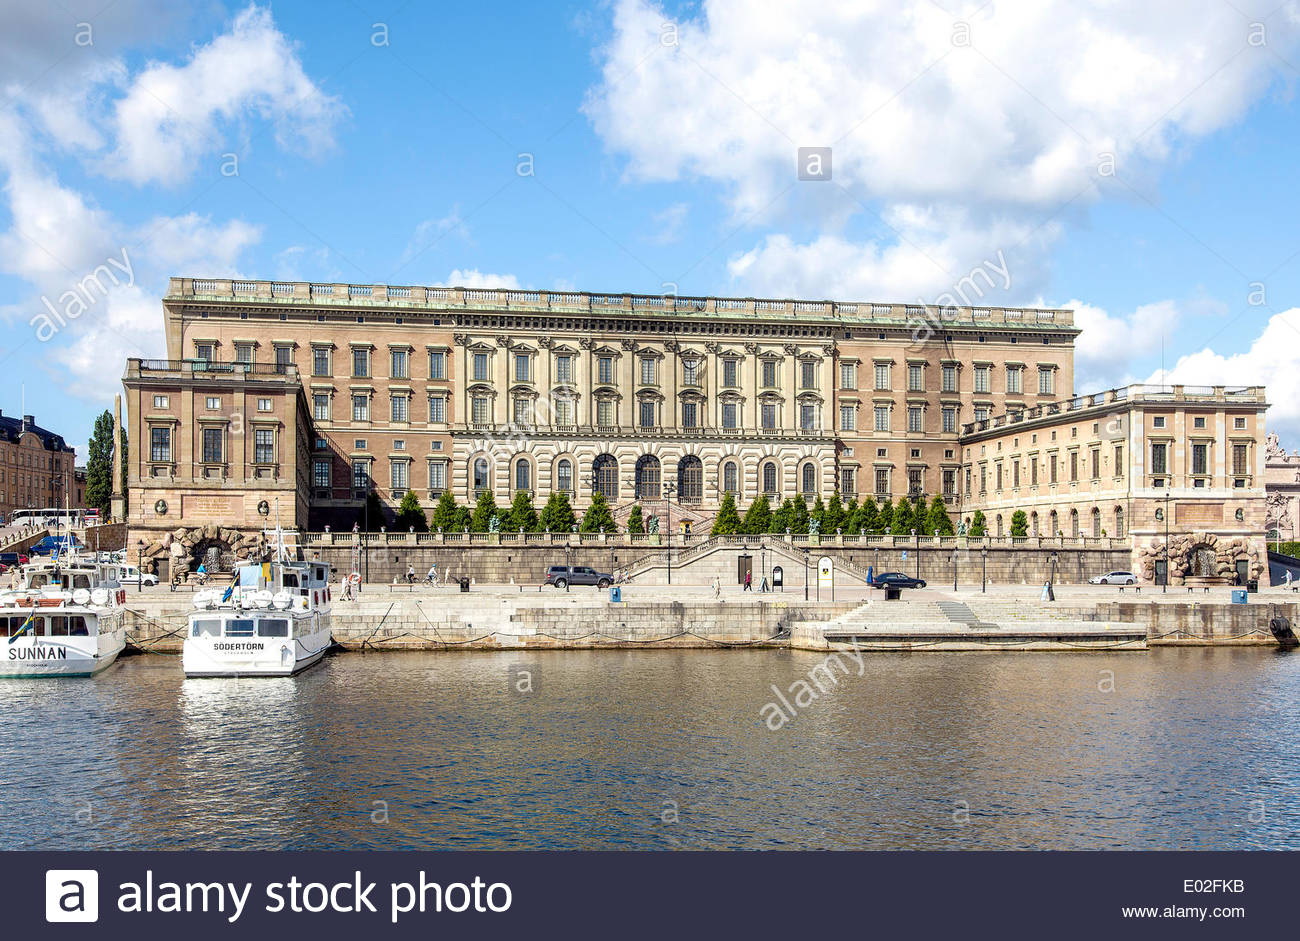 Images of Stockholm Palace | 1300x941